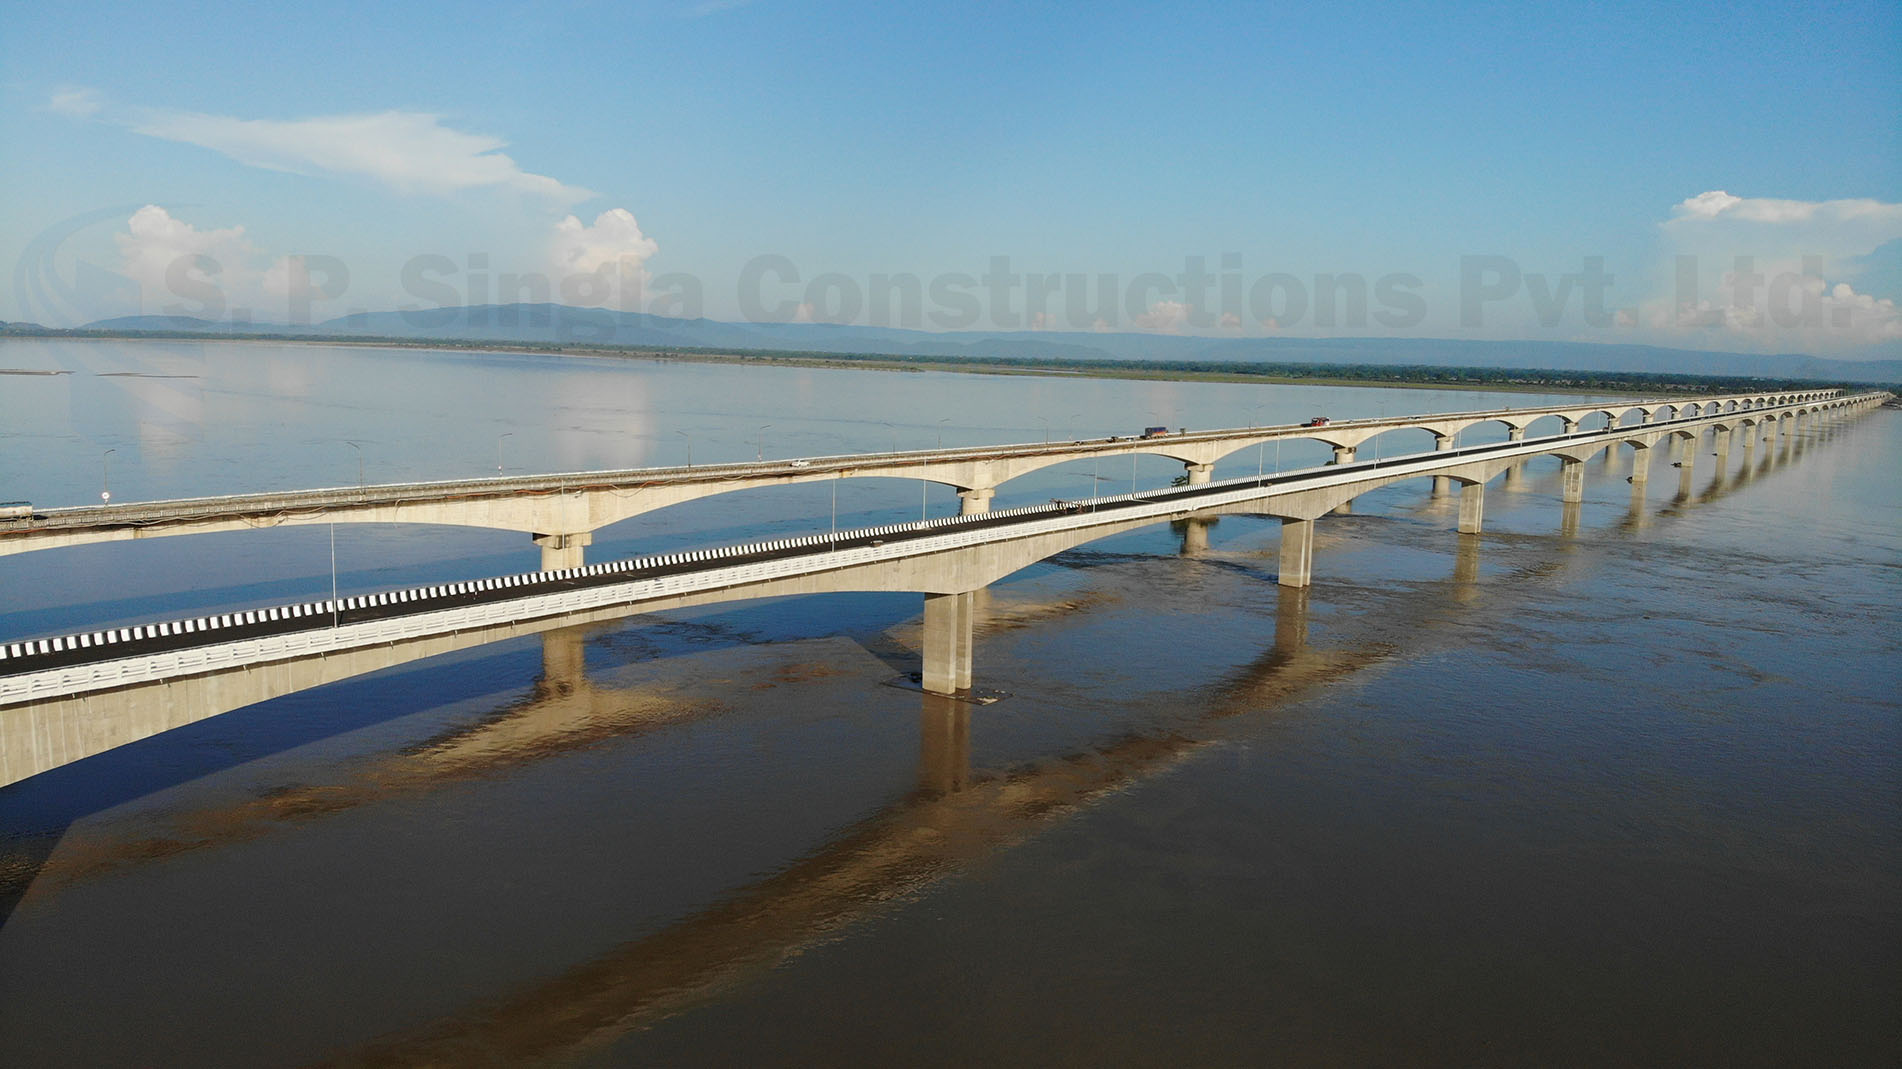 3.015 Km Long Balanced Cantilever Bridge across river Brahmputra in the state of Assam